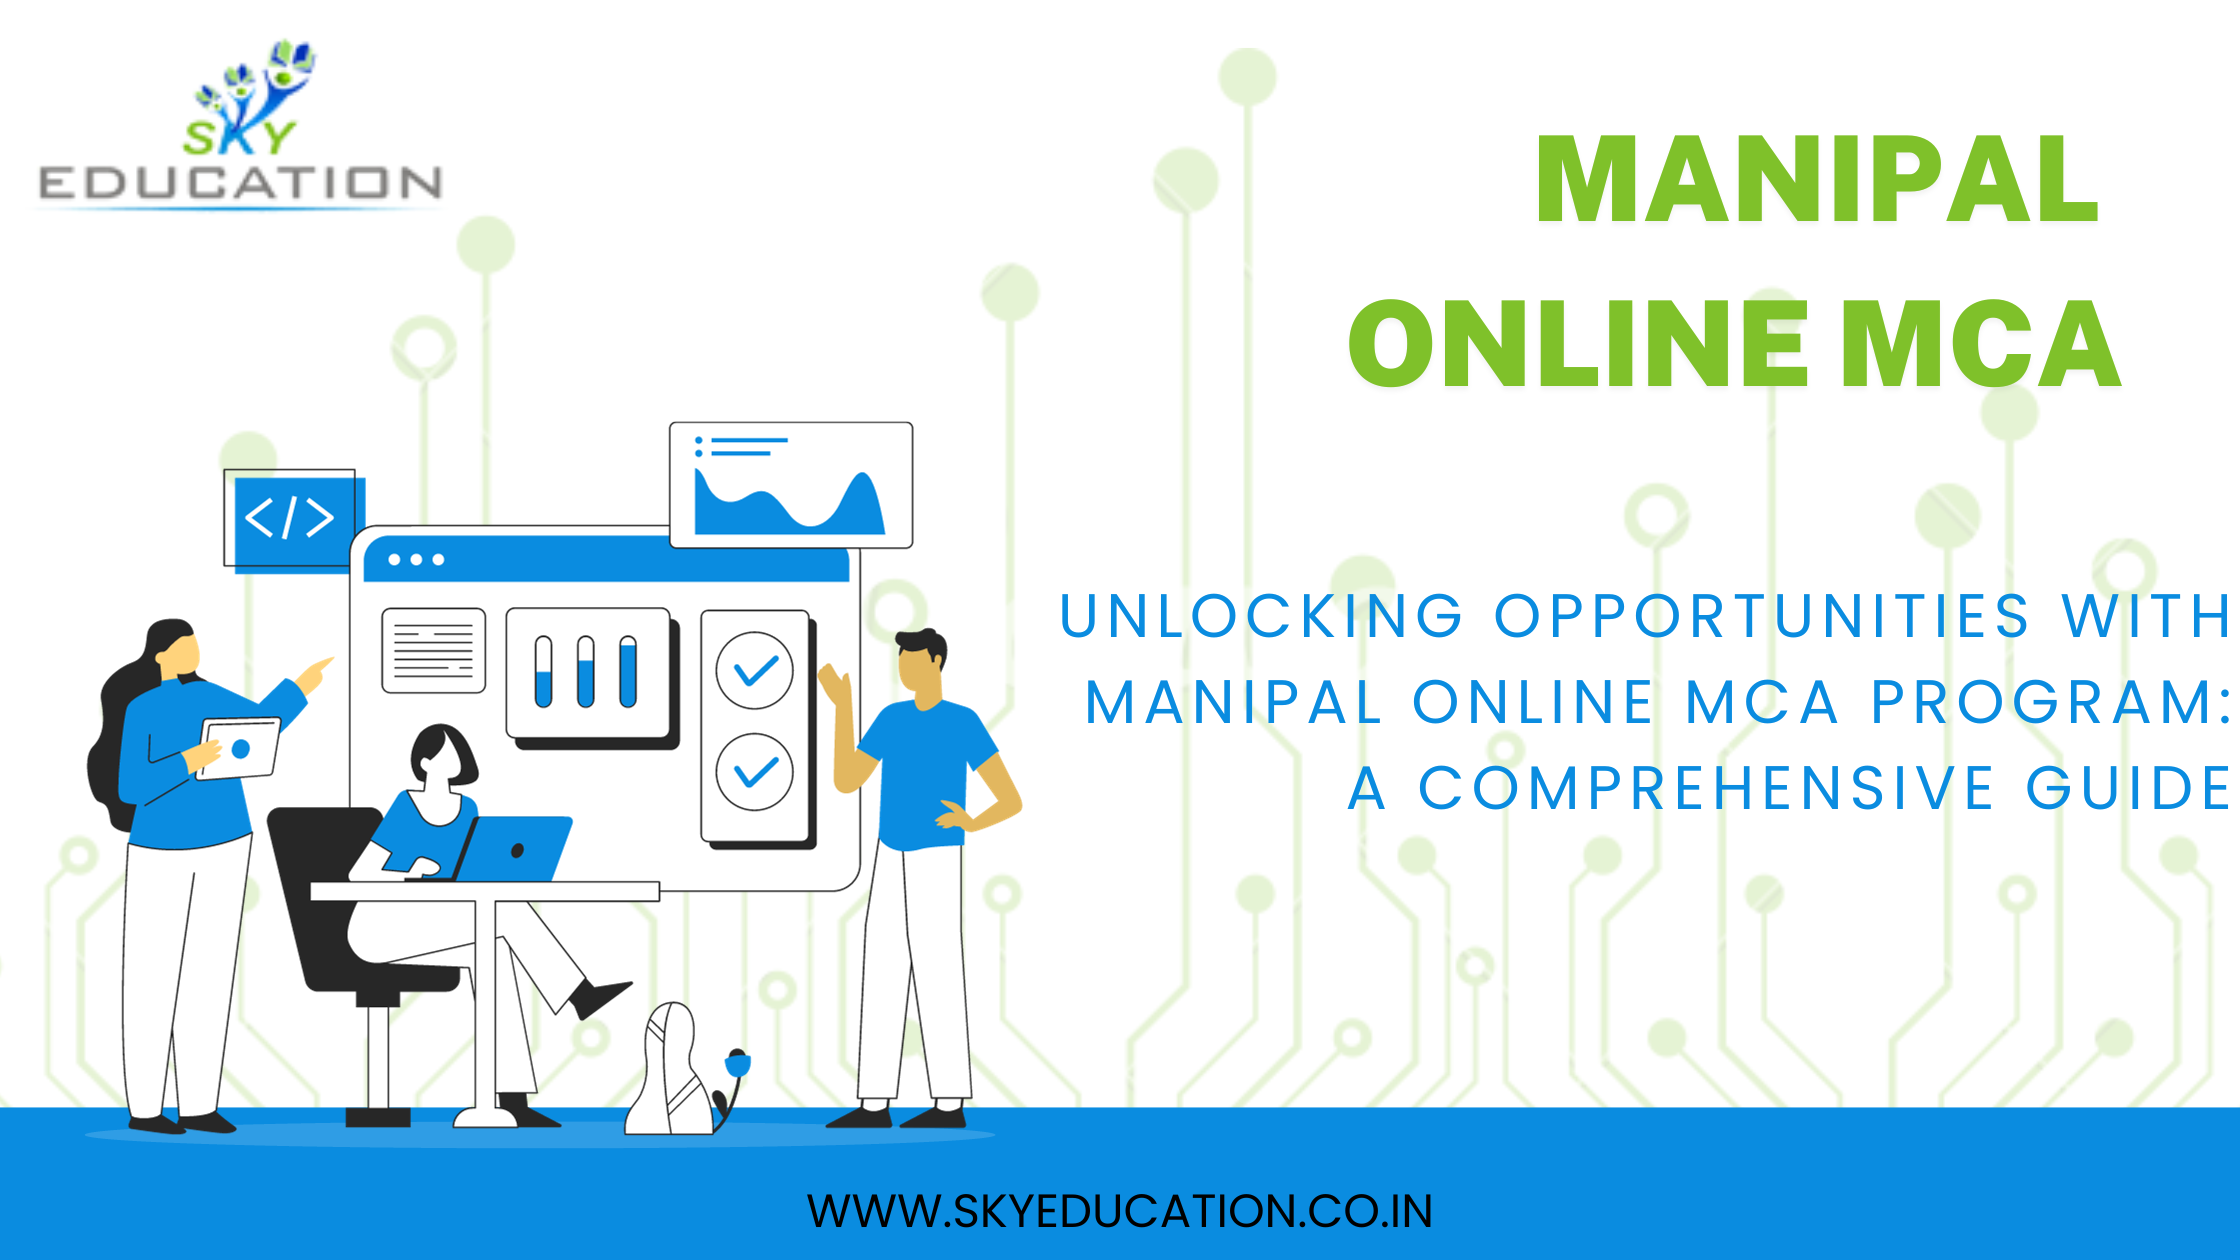 Unlocking Opportunities with Manipal Online MCA Program: A Comprehensive Guide 'photo